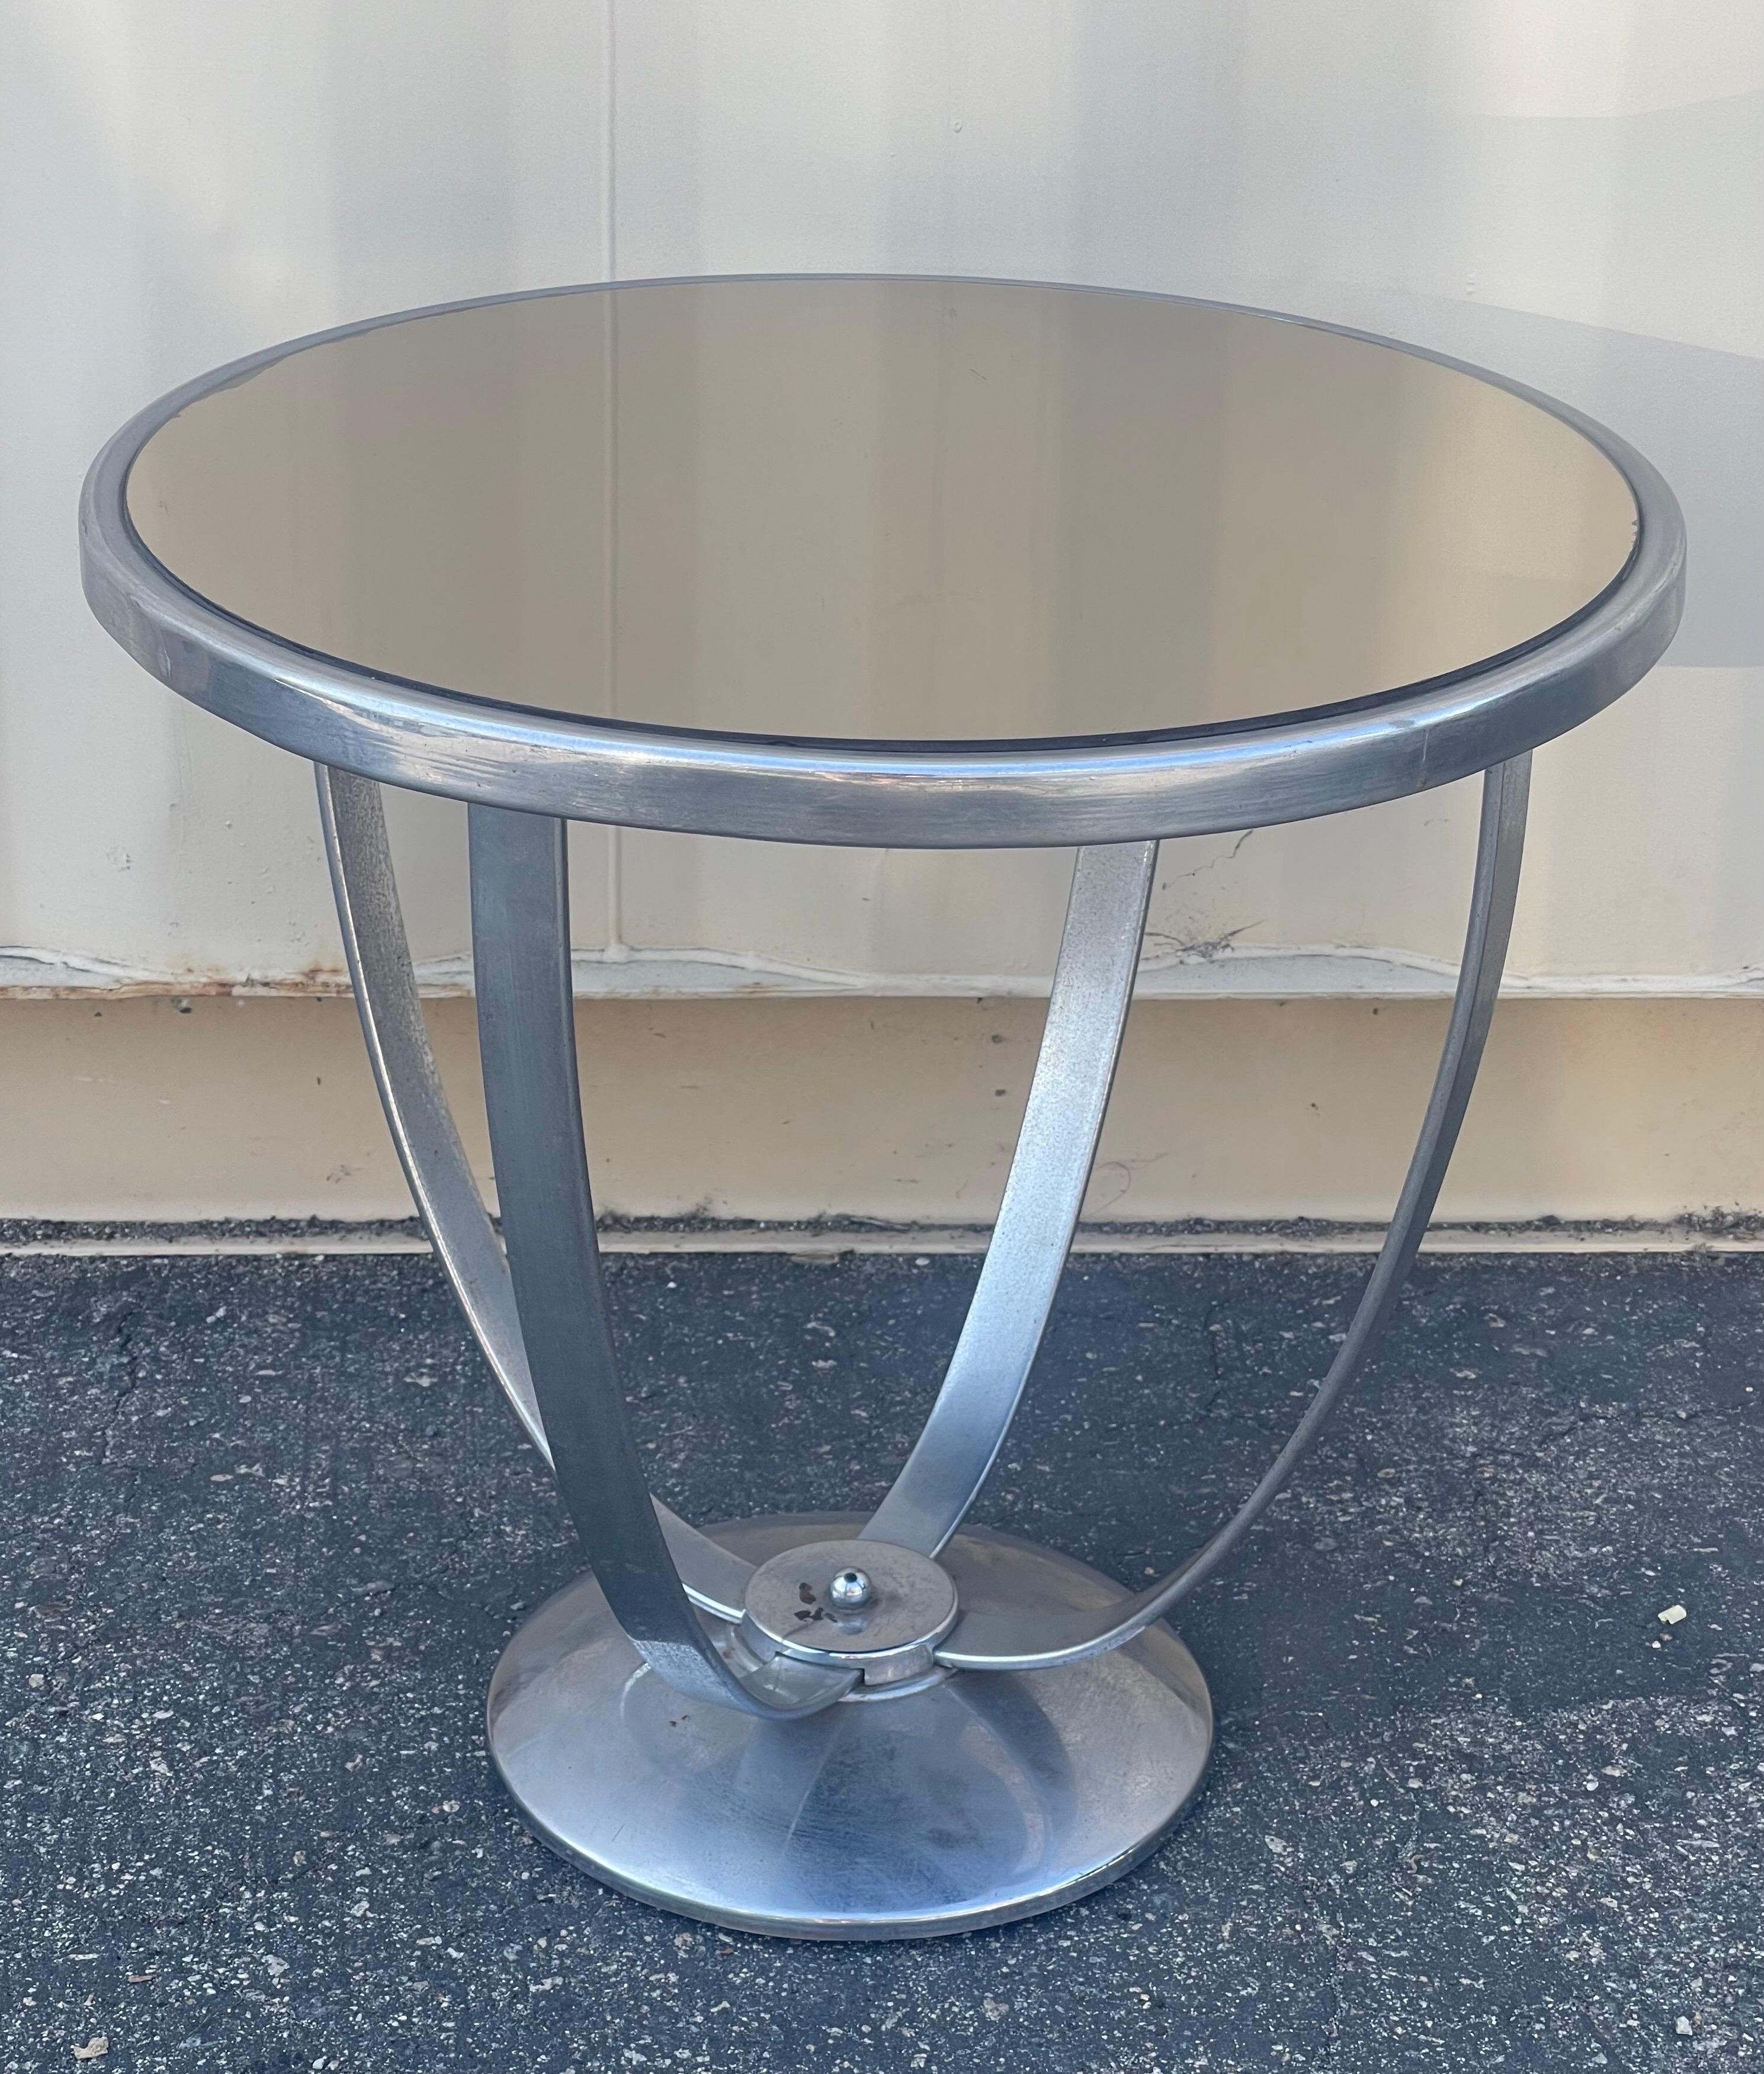 Art Deco Chrome with Mirrored Top Side Table by Wolfgang Hoffman for Howell Co. For Sale 3